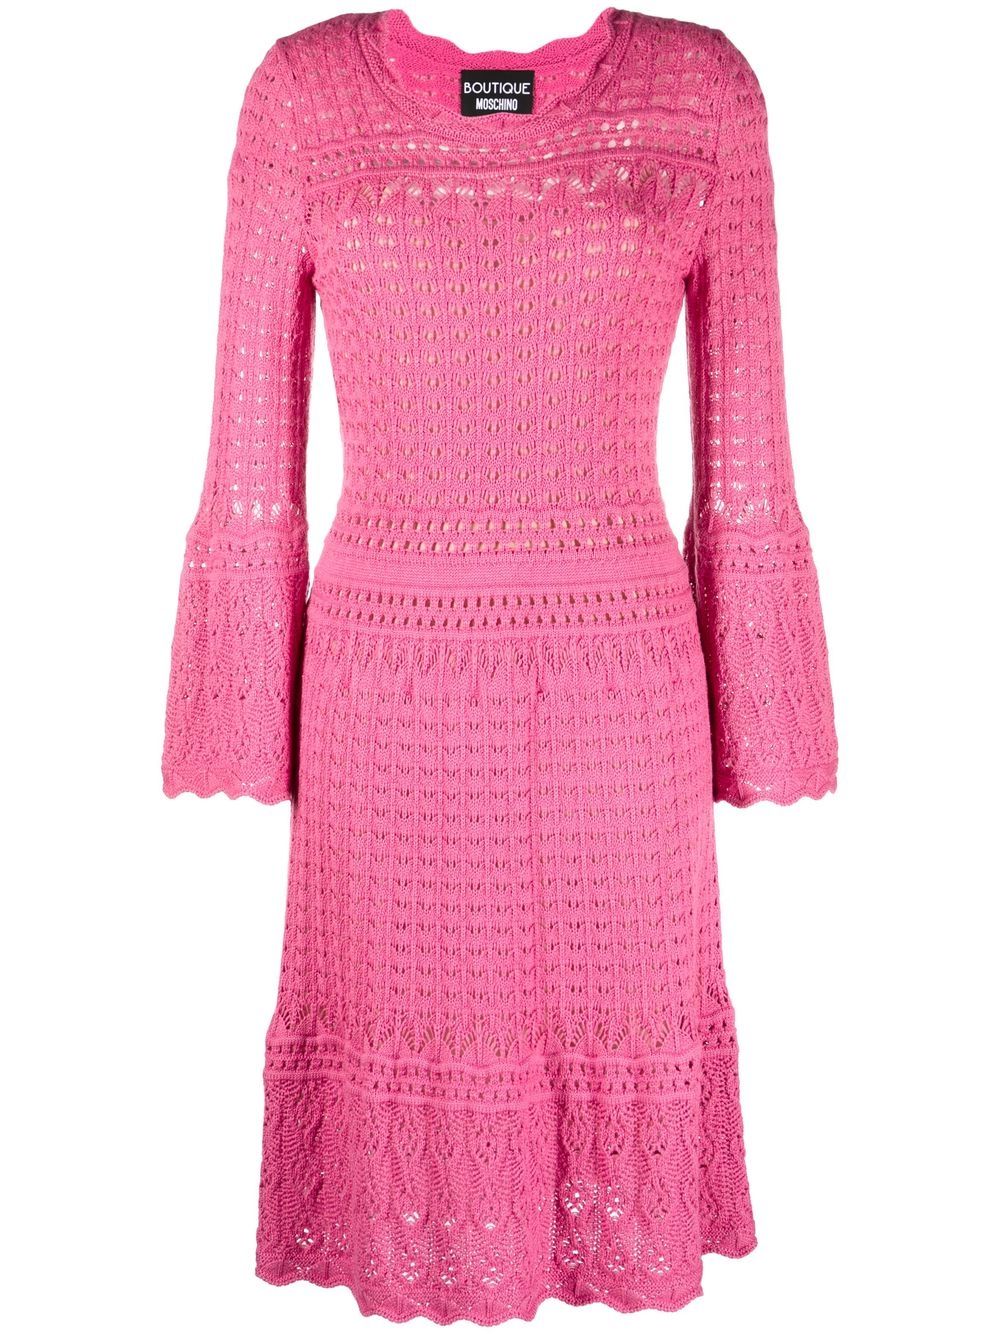 Boutique Moschino long-sleeve open-knit dress - Pink von Boutique Moschino